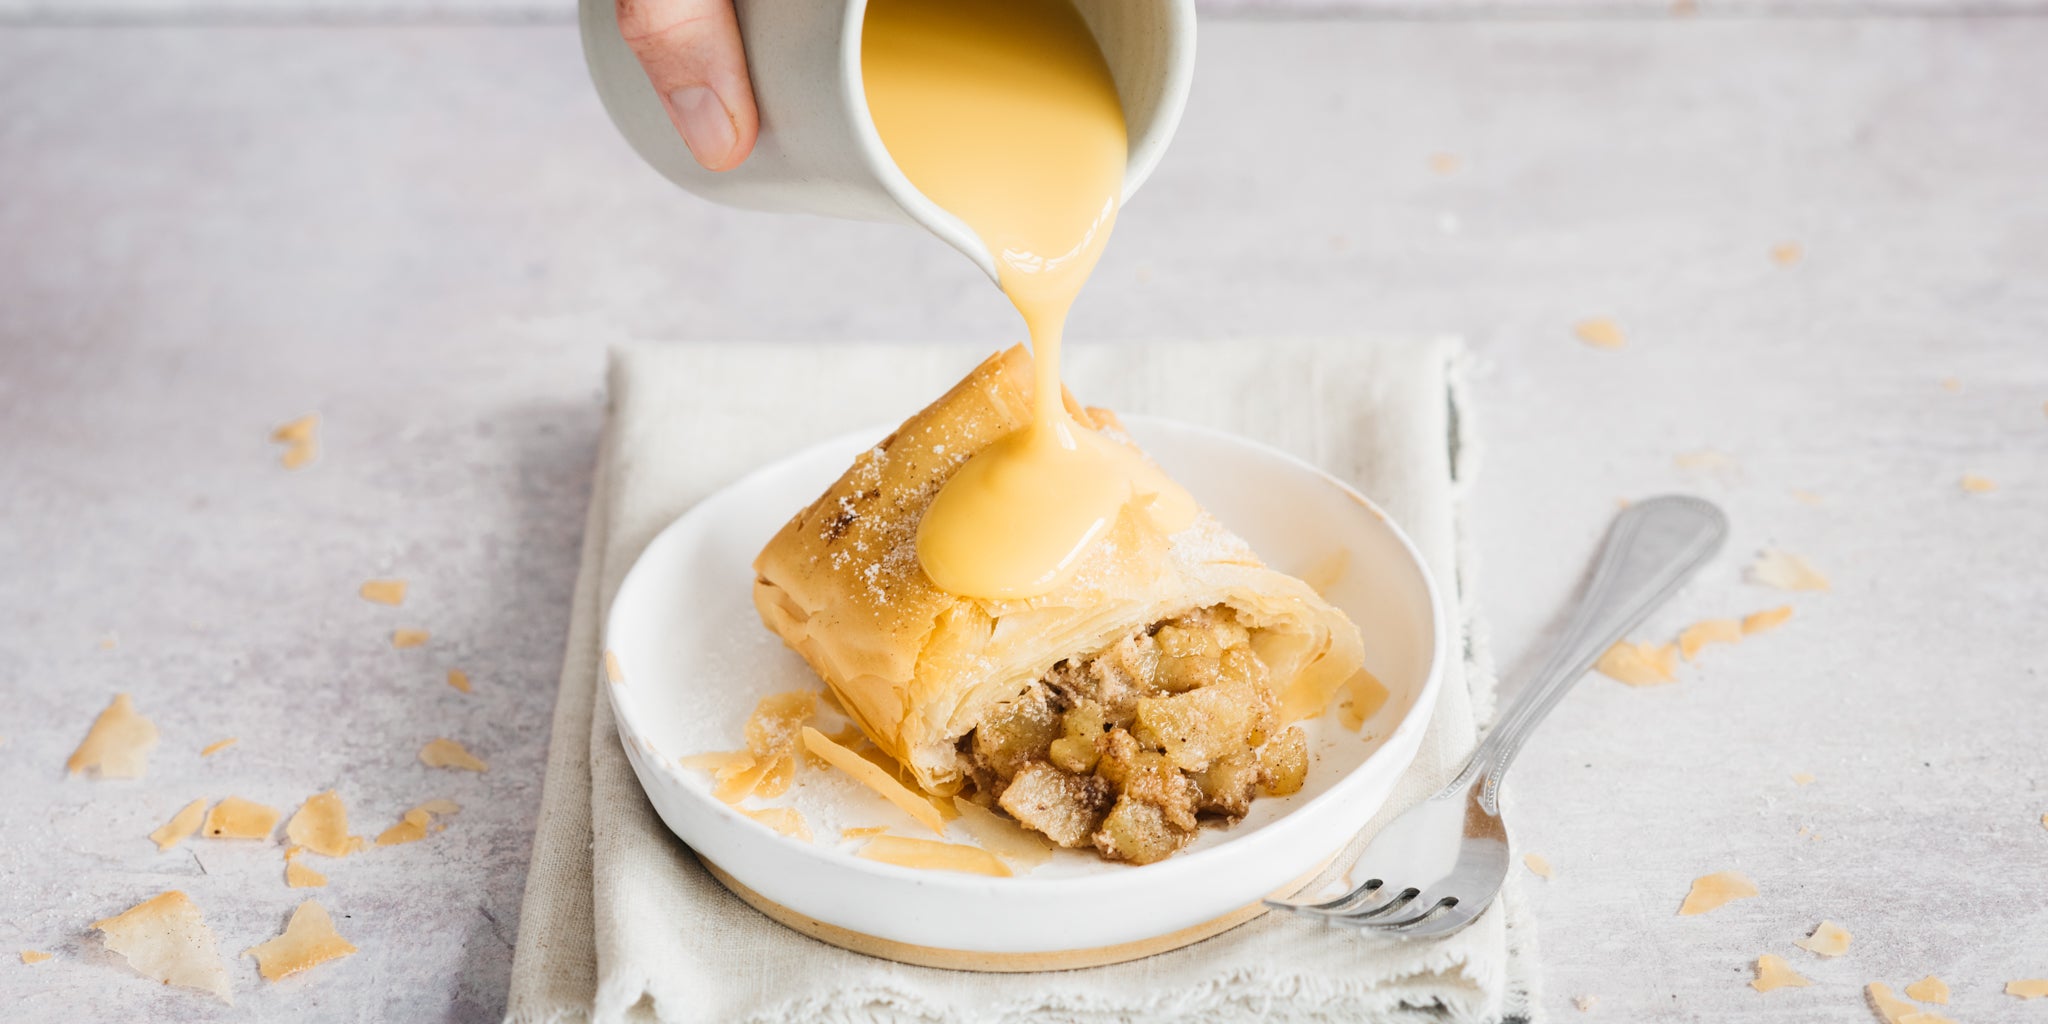 Apple strudel with cut poured on top